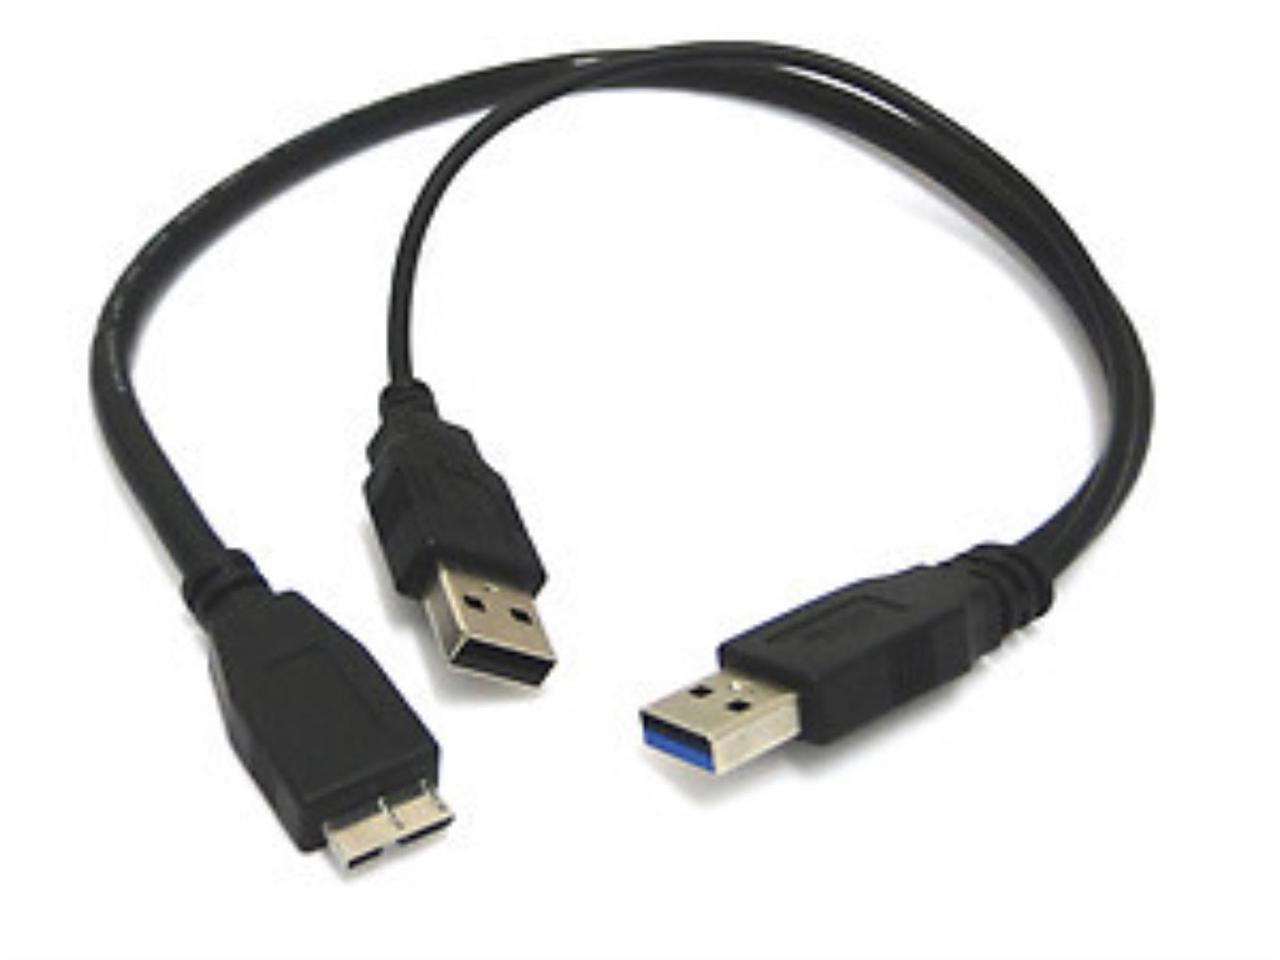 Beskæftiget Sociale Studier Maxim Dual USB 3.0 Cable Adapter Dual USB3.0 A Male to Micro USB 3.0 Y cable with  Extra Power for Mobile HDD - Newegg.com